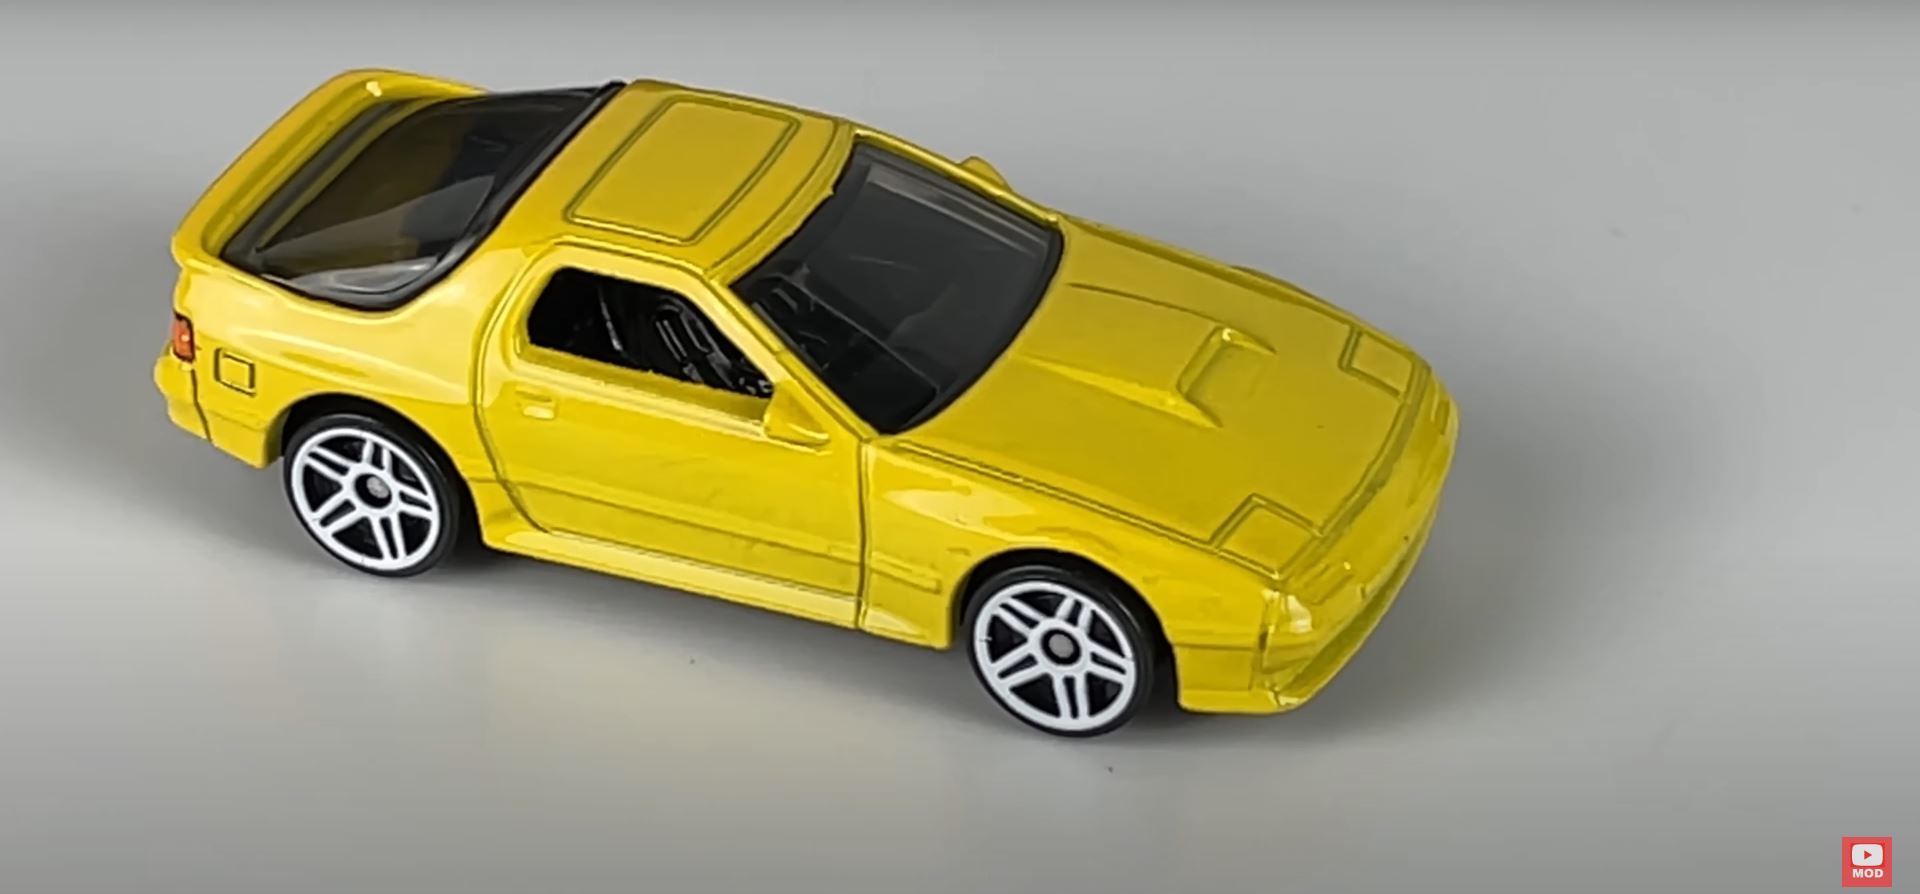 Hot Wheels Celebrates the Ford Mustang With a New 5-Pack, There Are More  Surprises Still - autoevolution